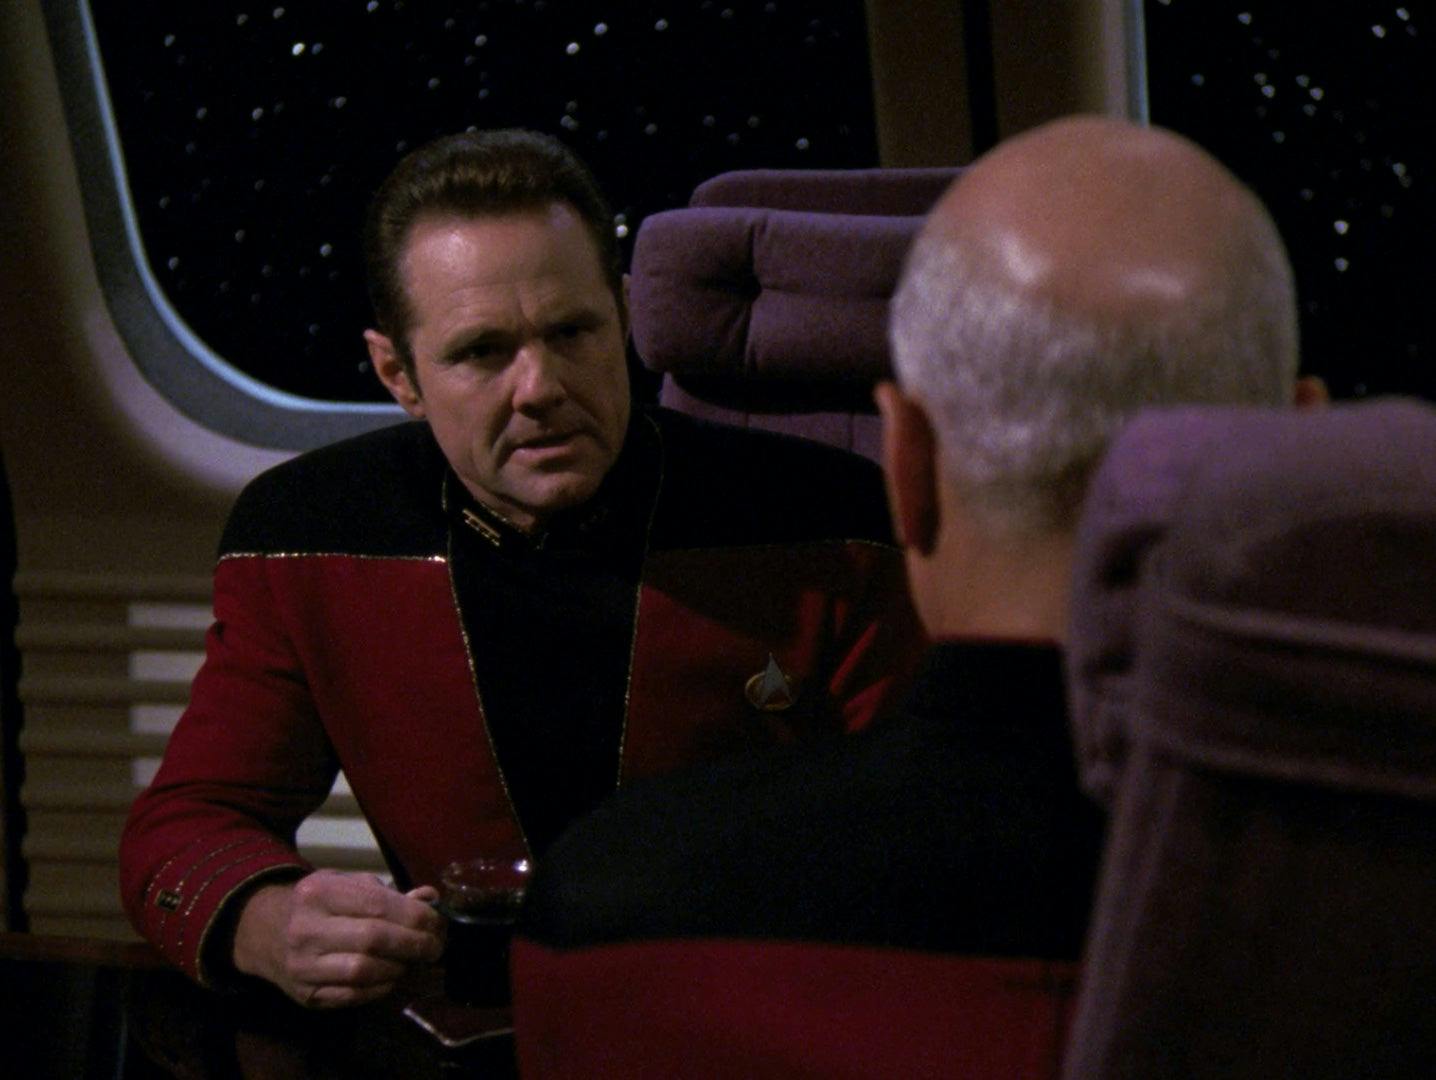 Kennelly sits across from Picard in a defensive and patronizing pose in the observation dock of The Next Generation's Enisgn Ro